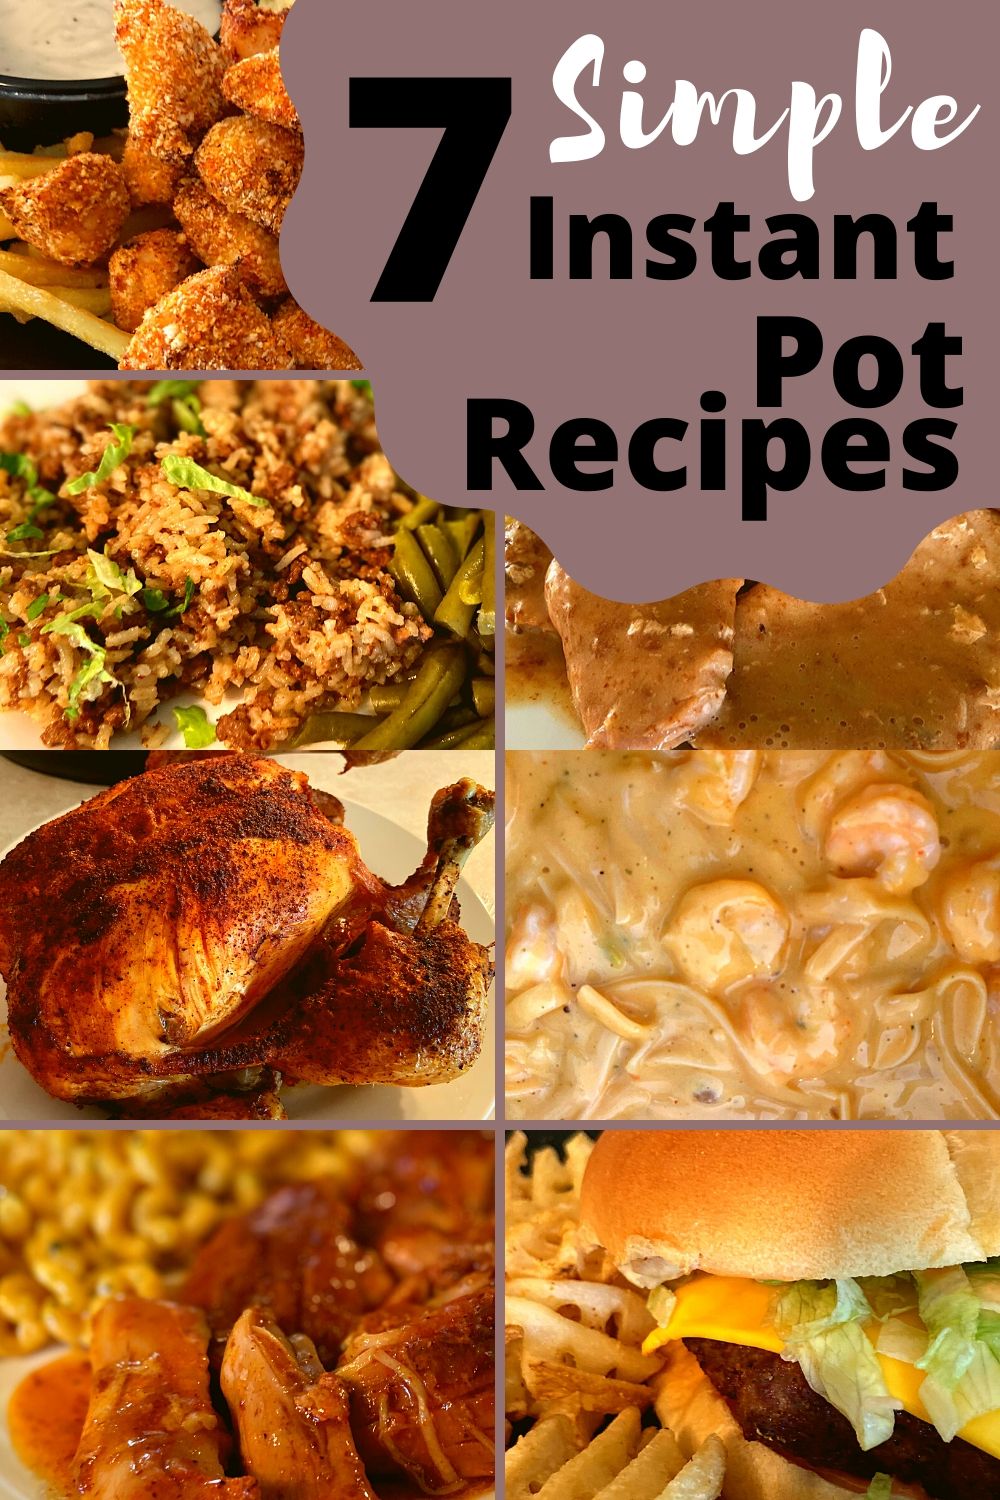 Instant Pot Chicken nuggets, ground beef and rice, pork chops and gravy, whole chicken, shrimp fettuccine, chicken thighs & gravy, and Instant Pot burgers.